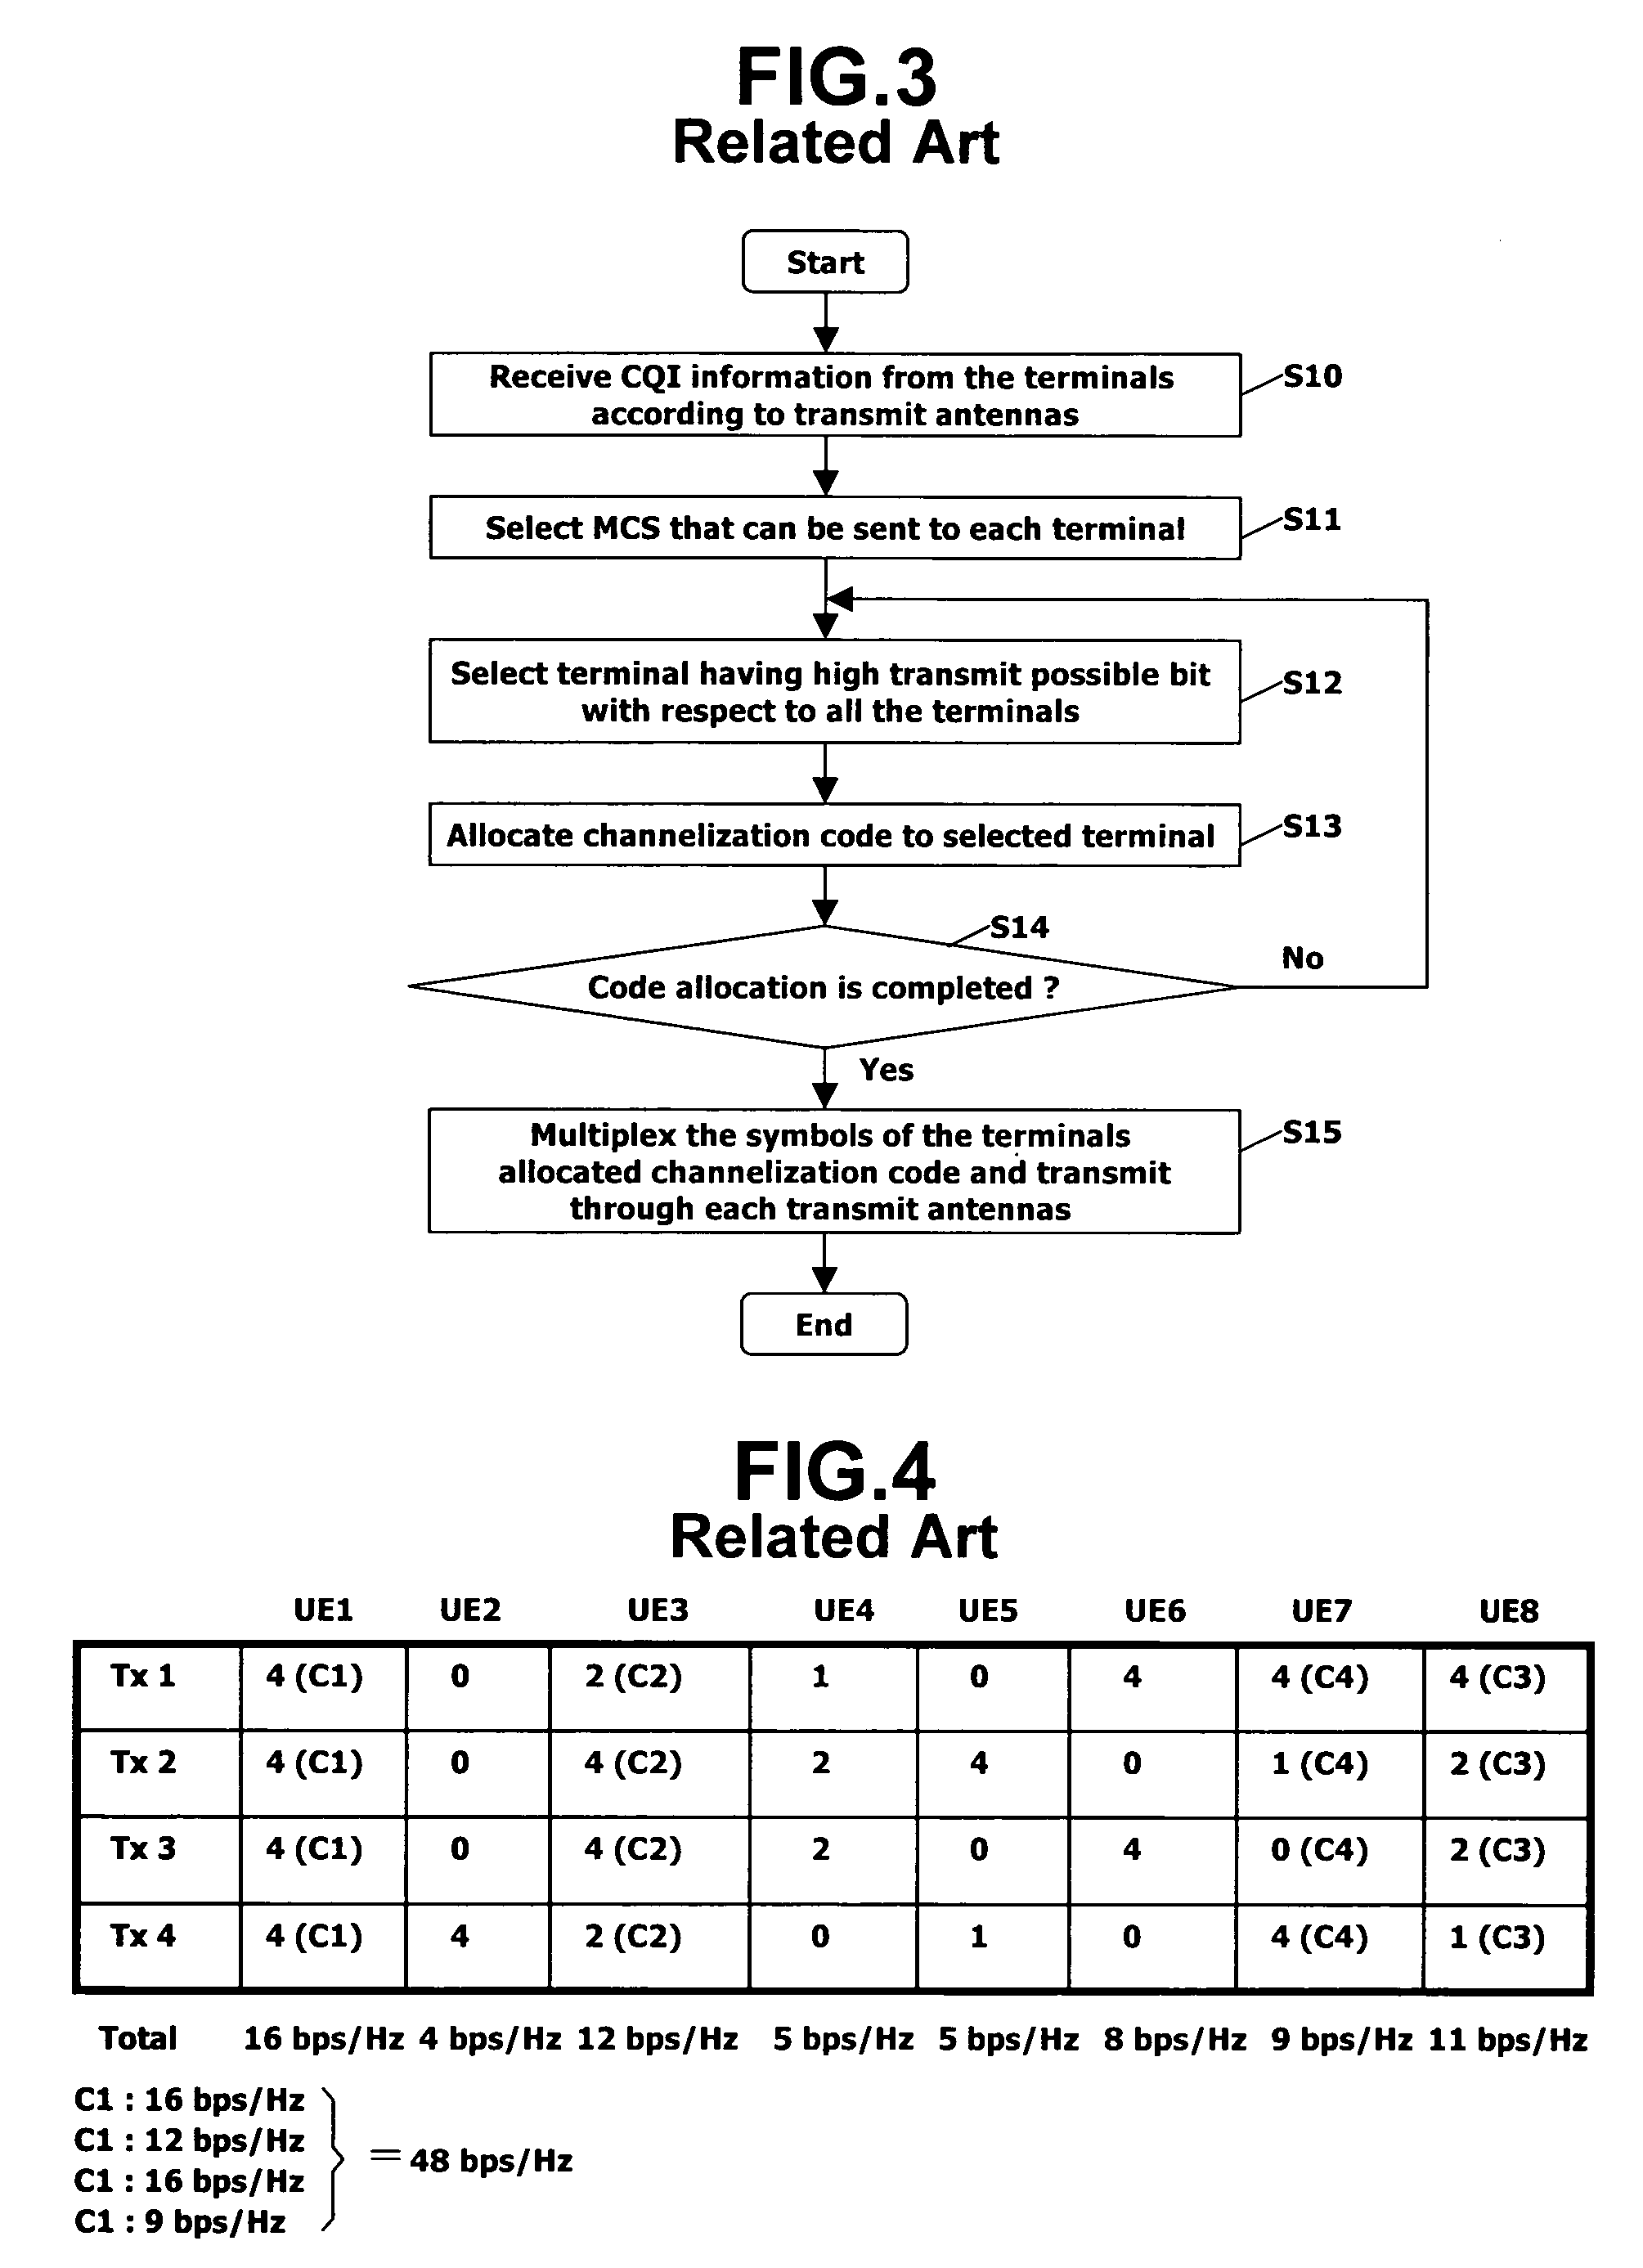 Method and apparatus for allocating channelization codes for wireless communications